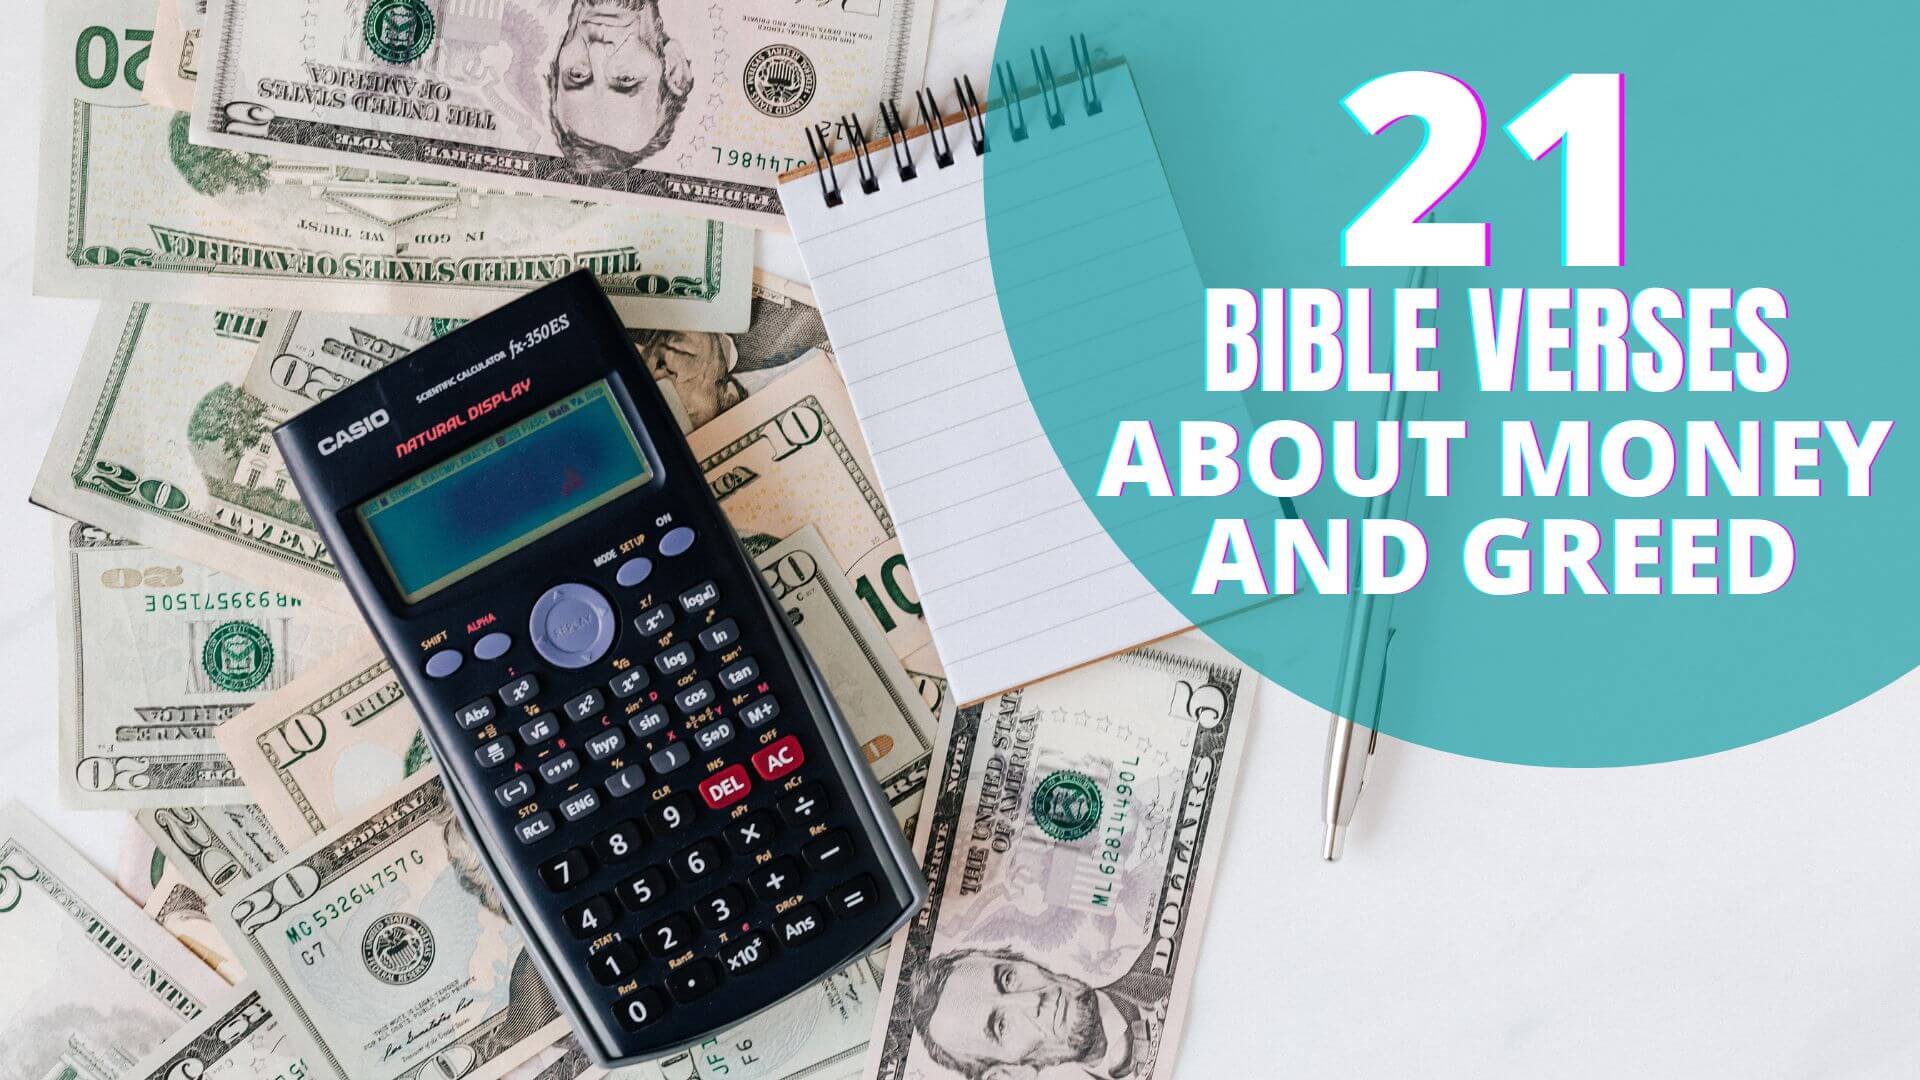 Bible verses about money and greed